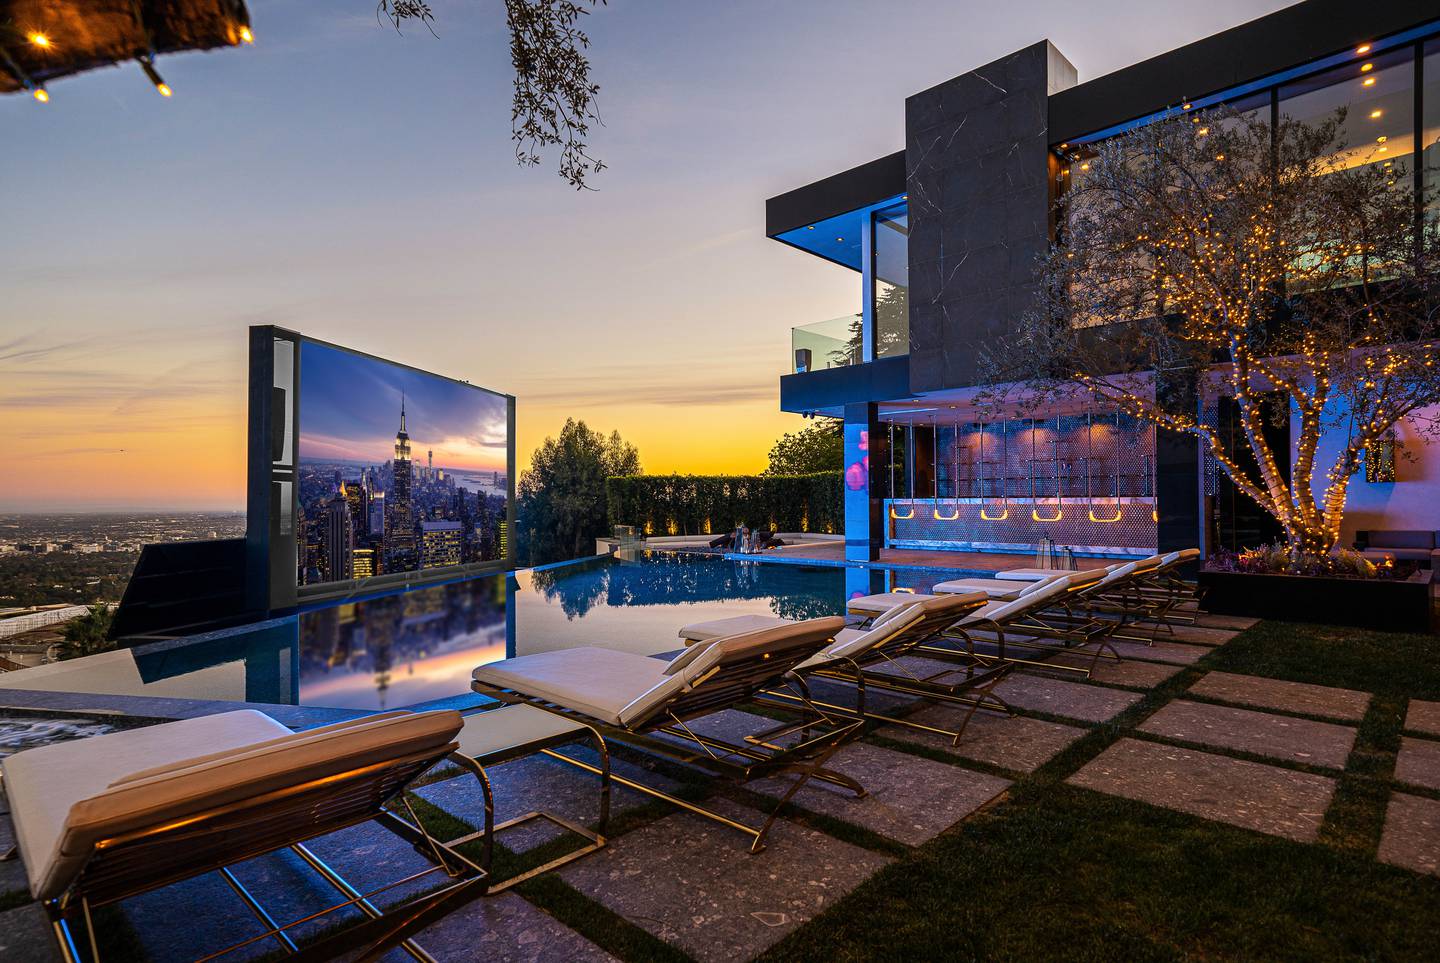 The 23-foot pool screen in the garden of the Bel Air mansion. Photo: Savills